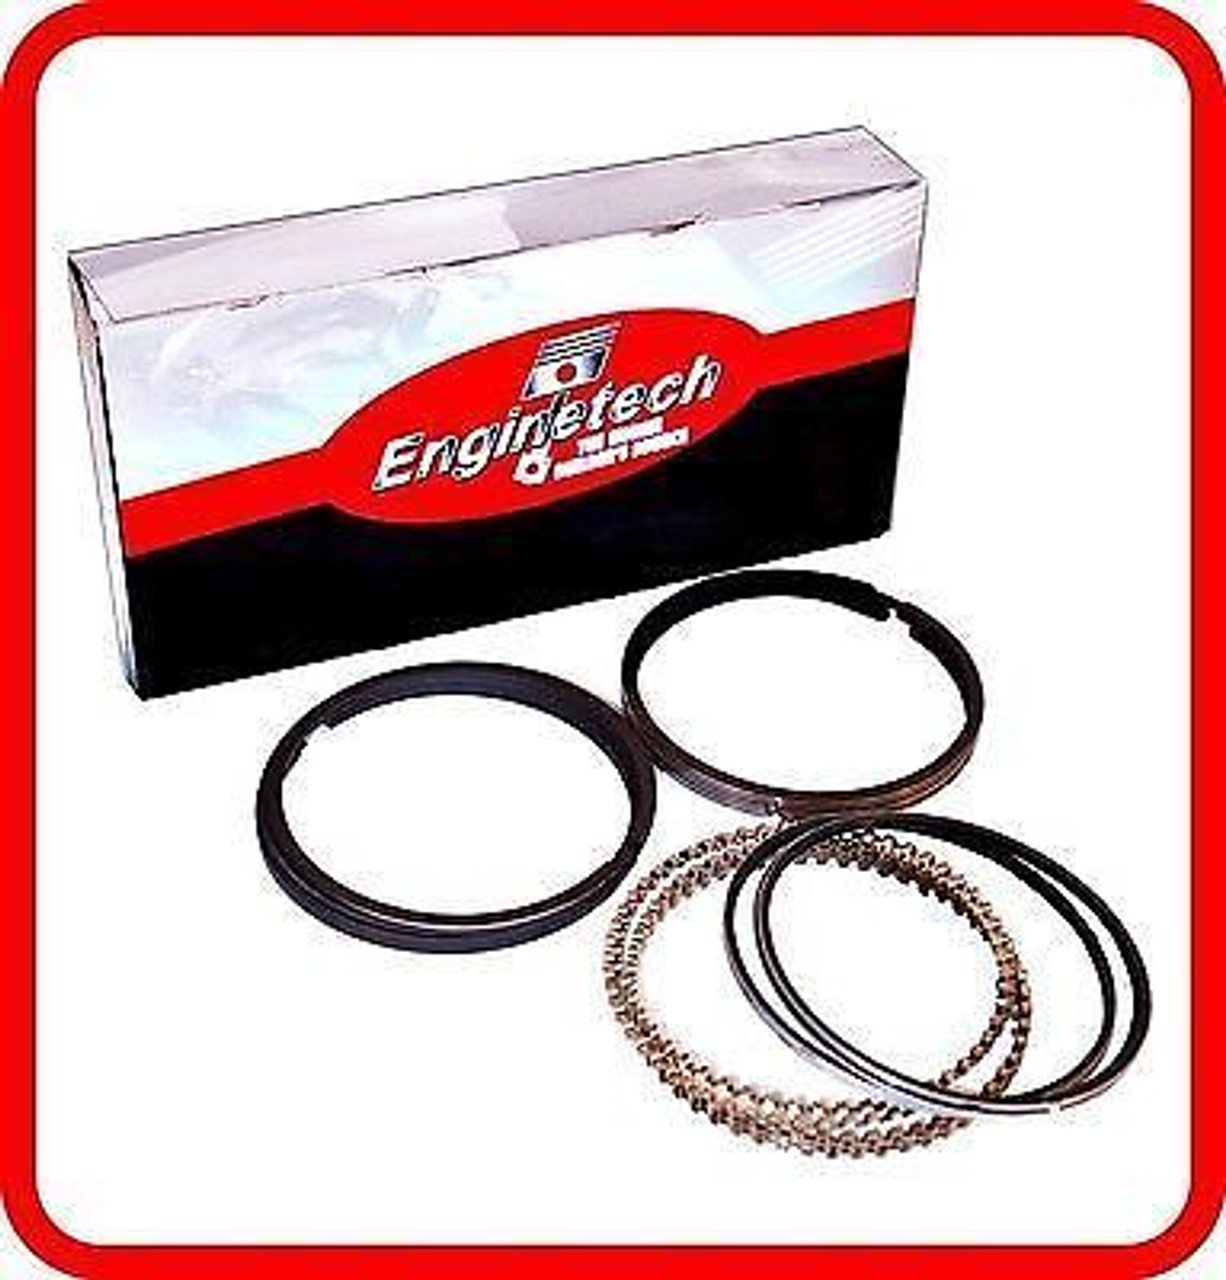 1990 Ford Country Squire 5.0L Engine Piston Ring Set M40018 -230